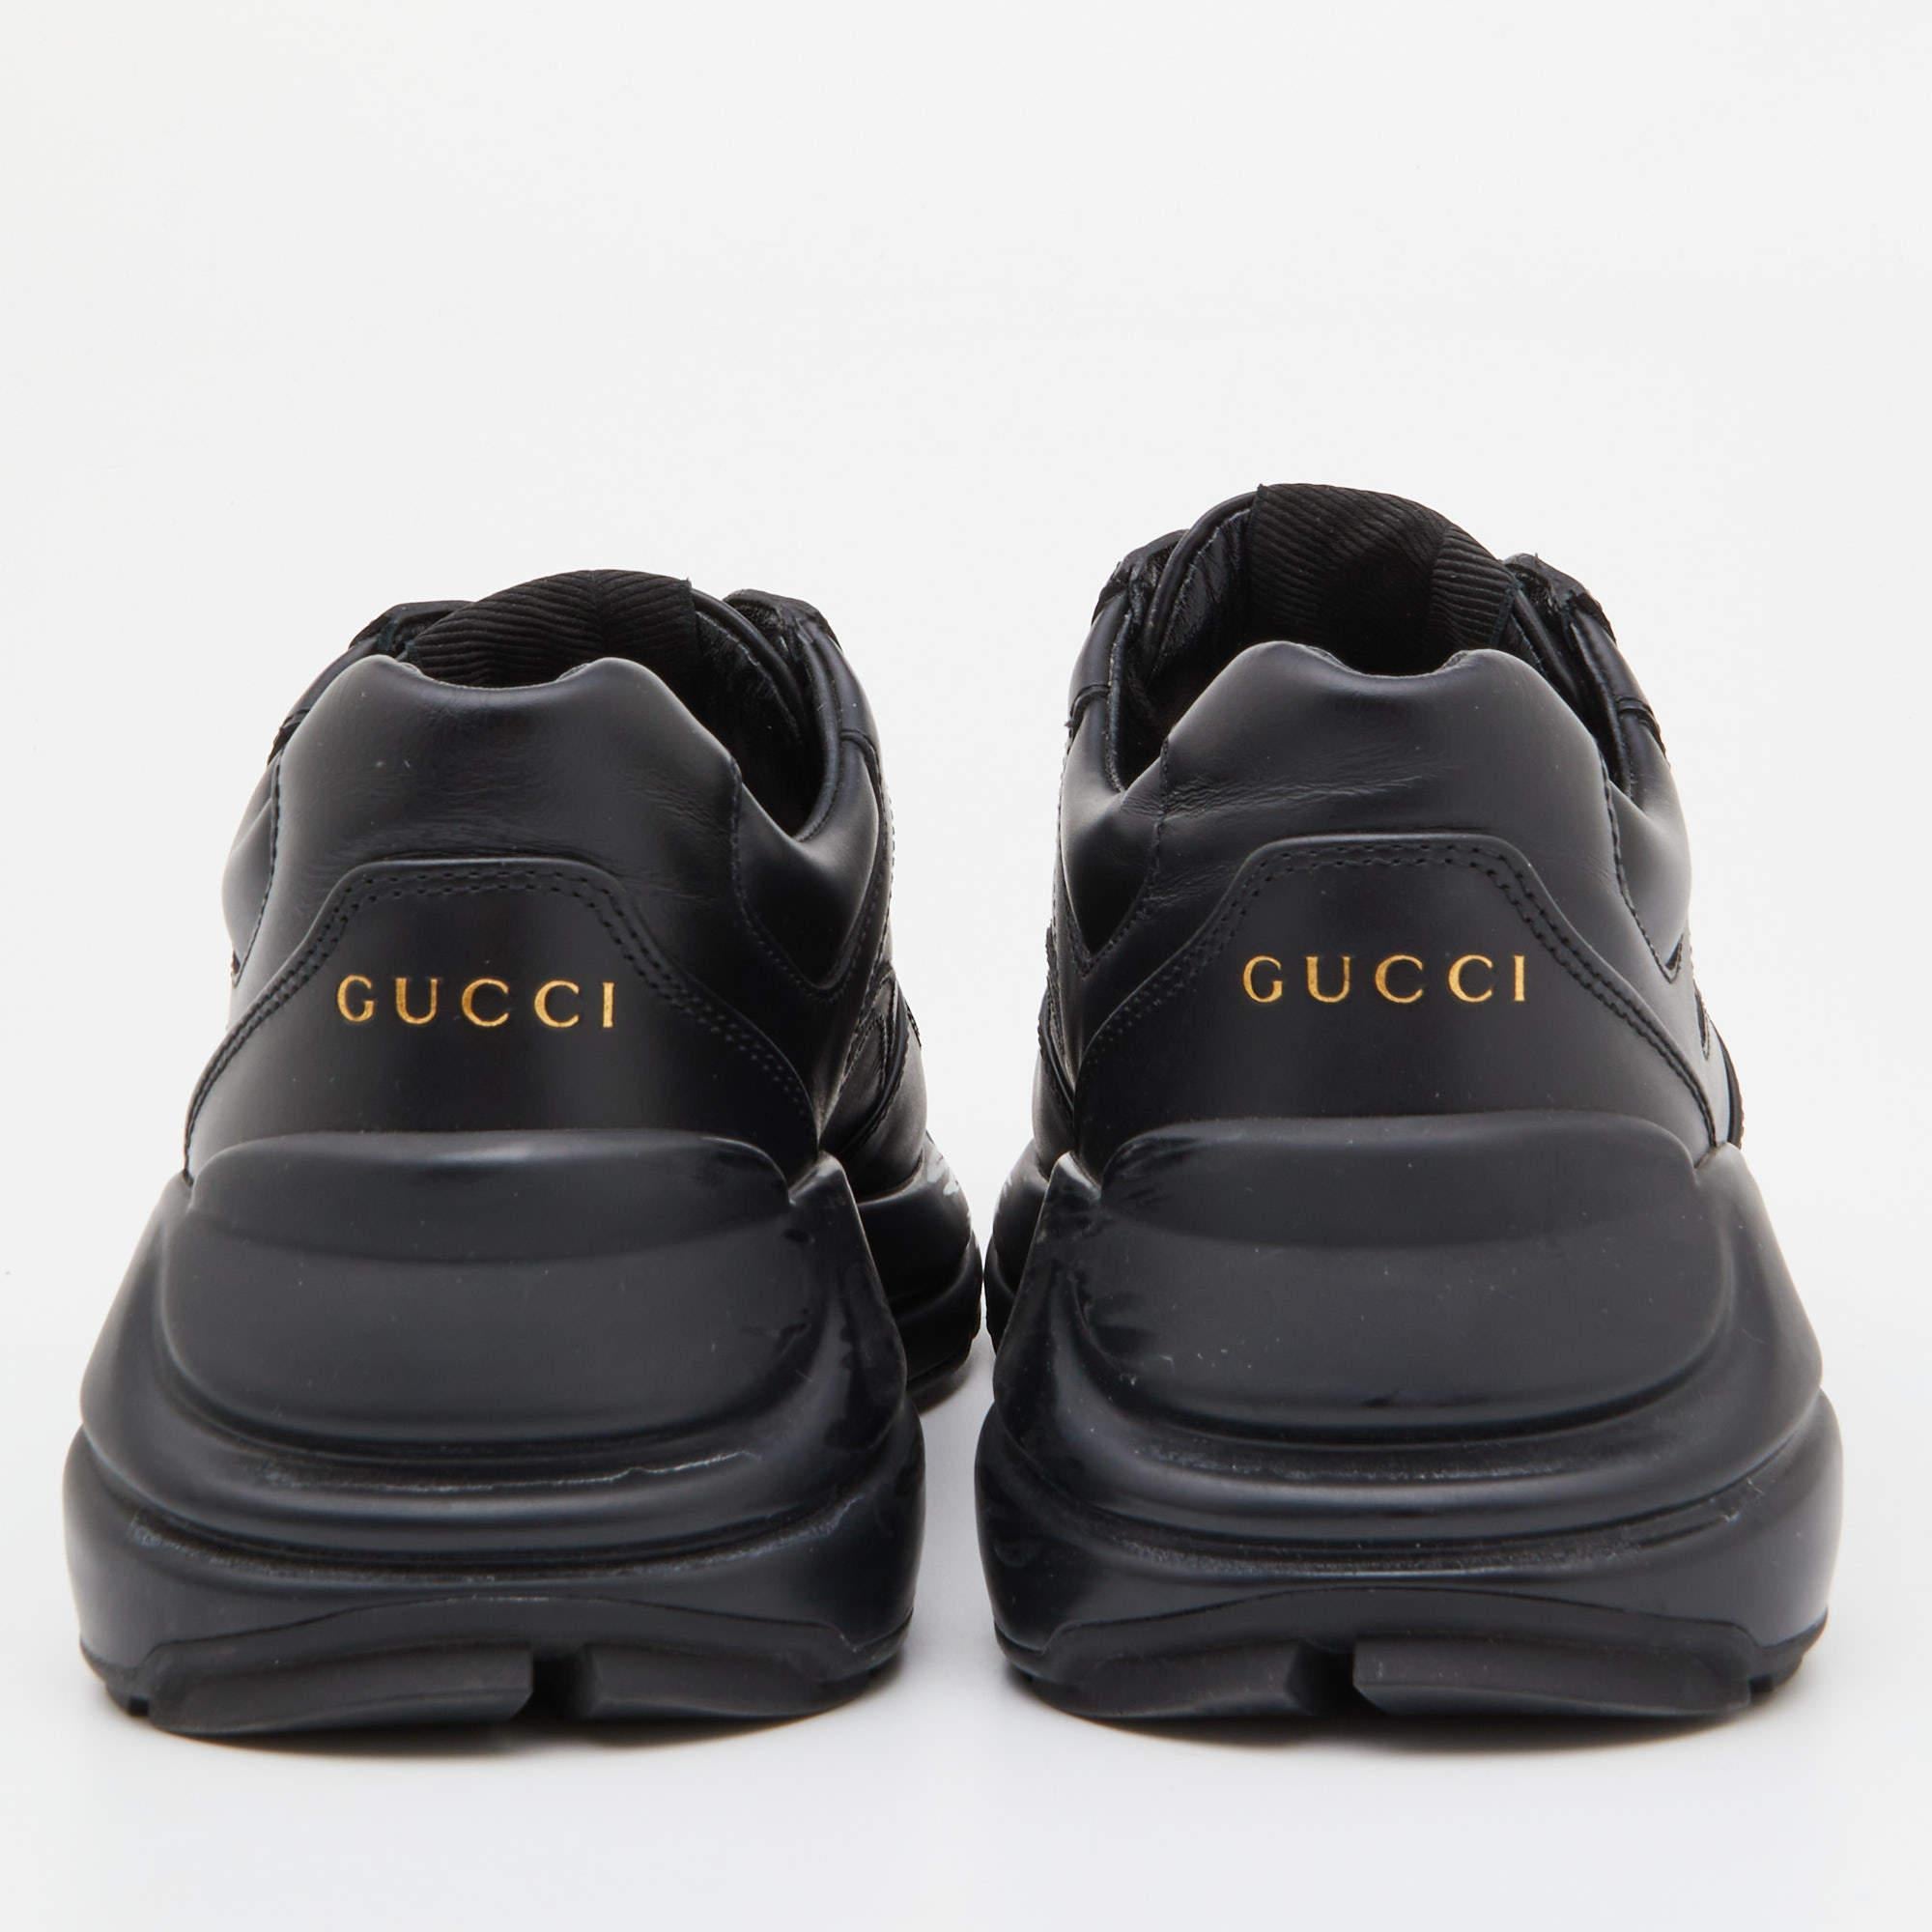 Gucci Black Leather Rhyton Sneakers Size 36 3